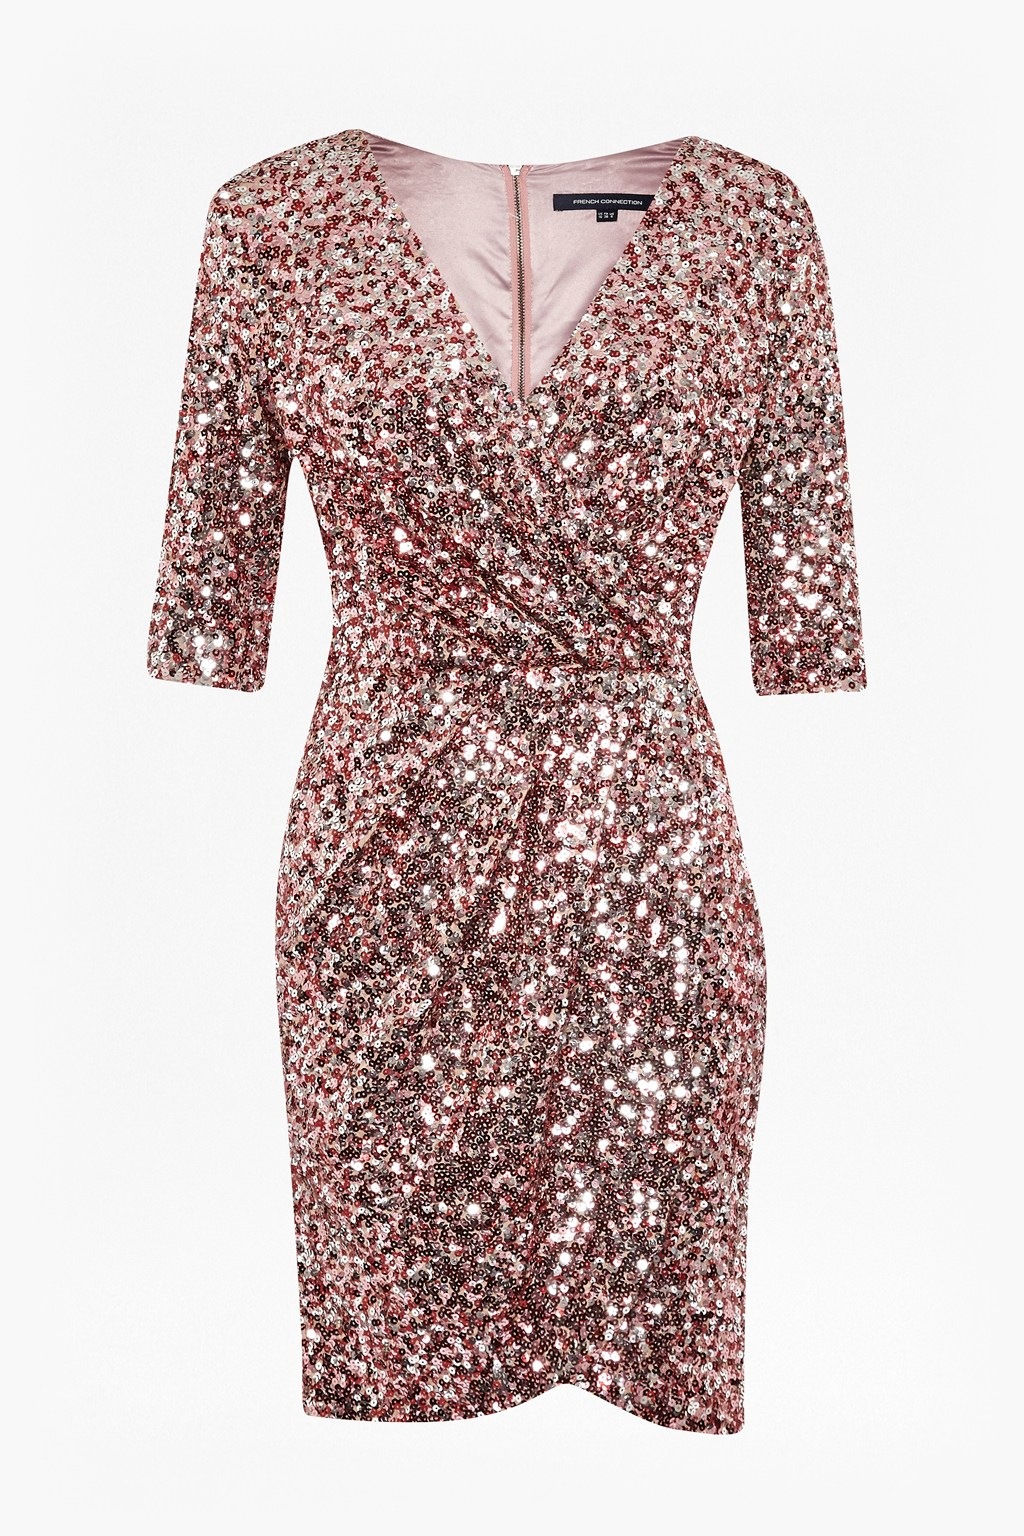 French connection Lunar Sparkle Sequin Wrap Dress in Gray | Lyst